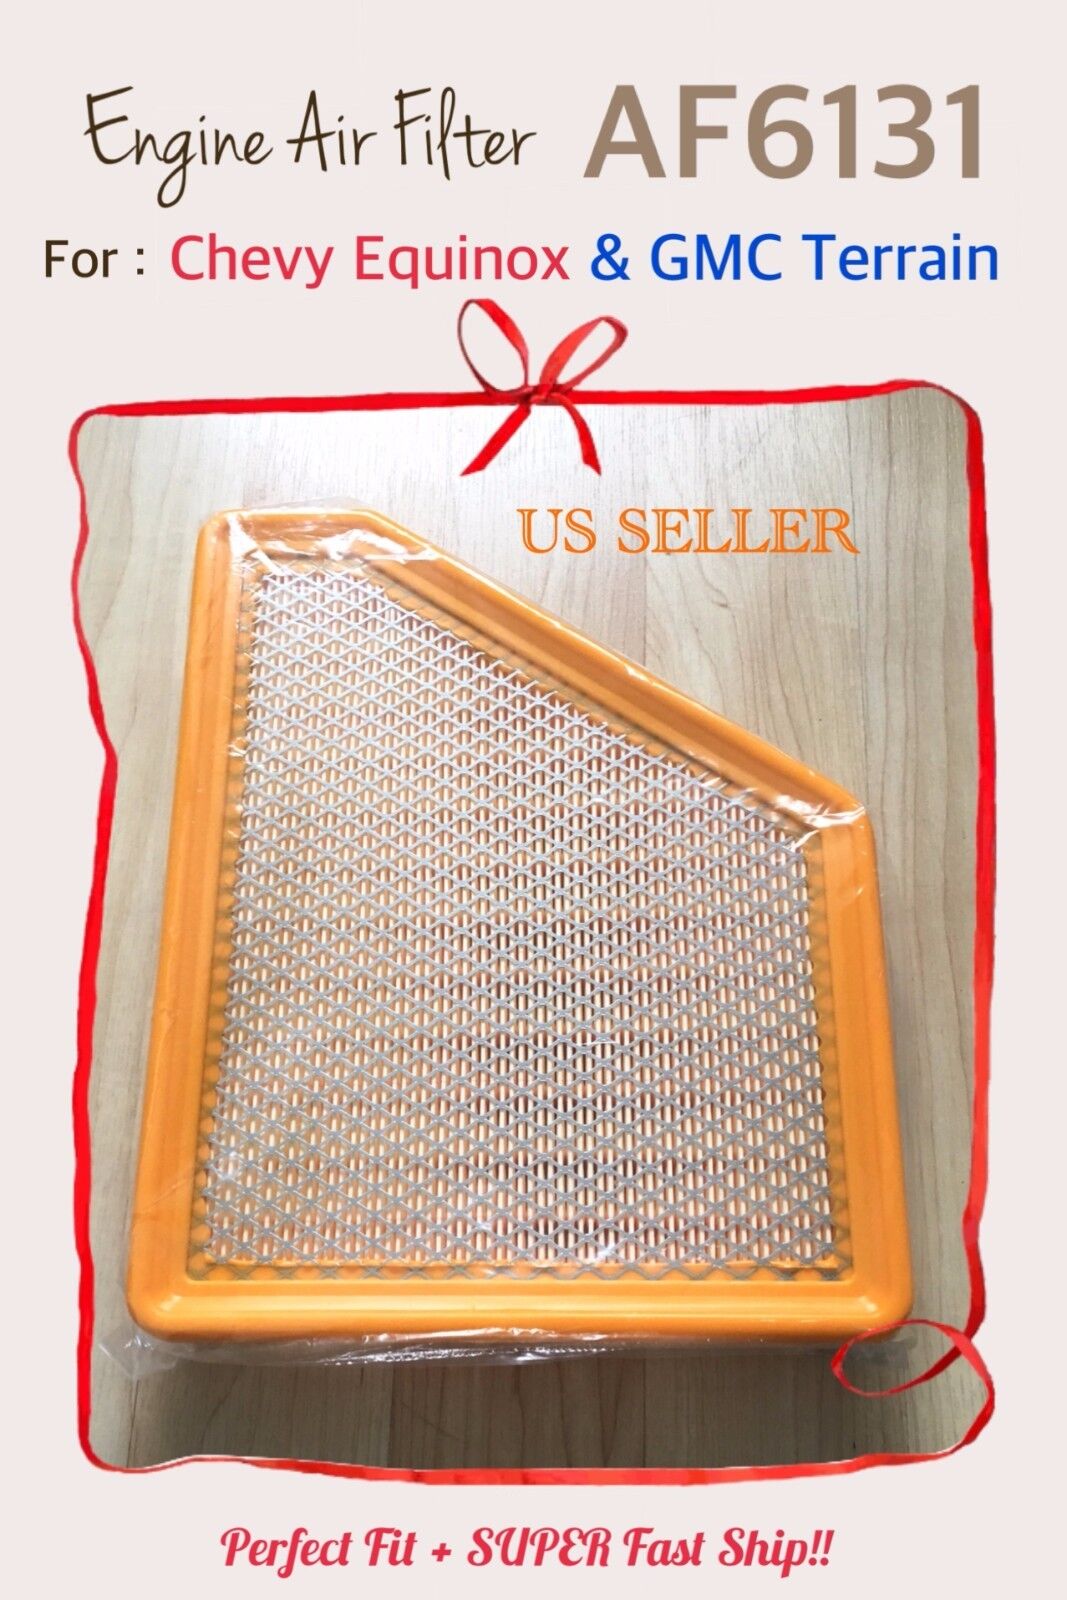 High Quality AIR FILTER AF6131 for 10-17 Chevy Equinox & 10-17 GMC Terrain